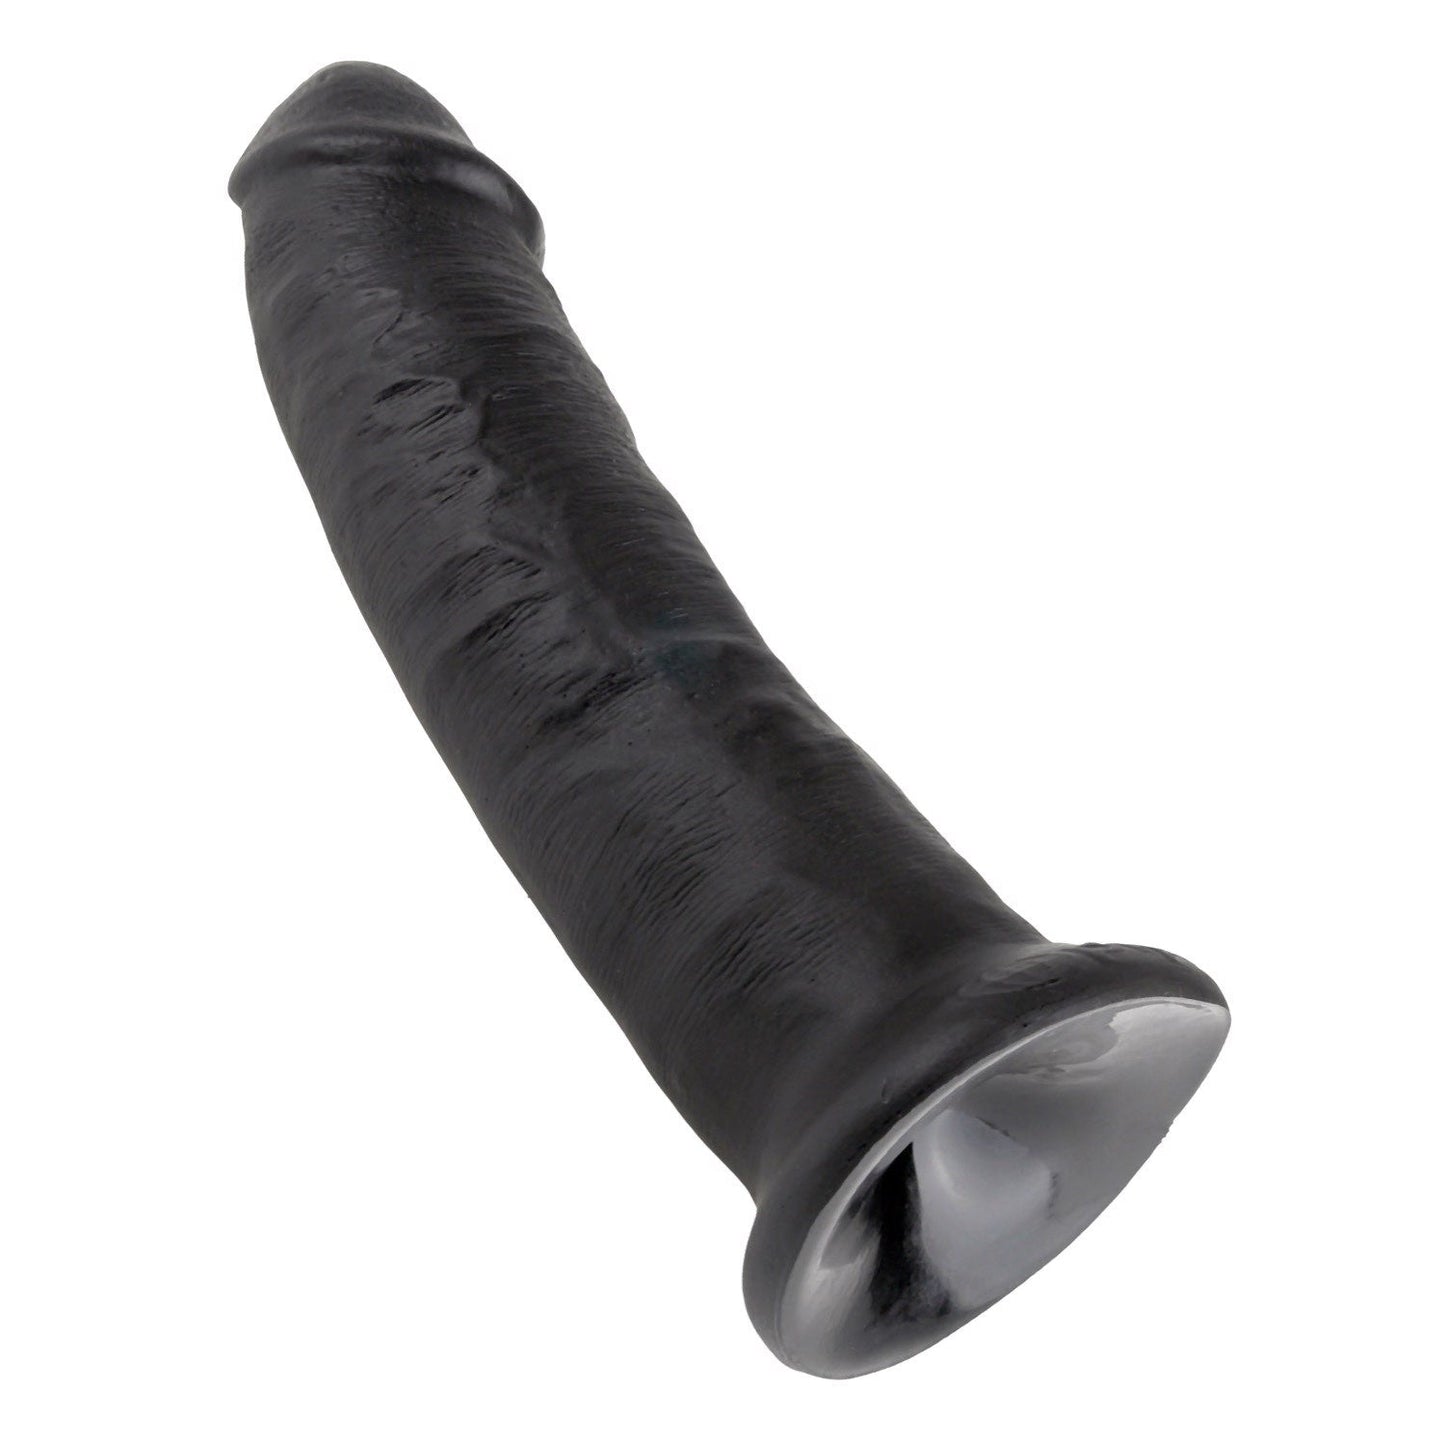 9" Cock - Black 22.9 cm (9") Dong